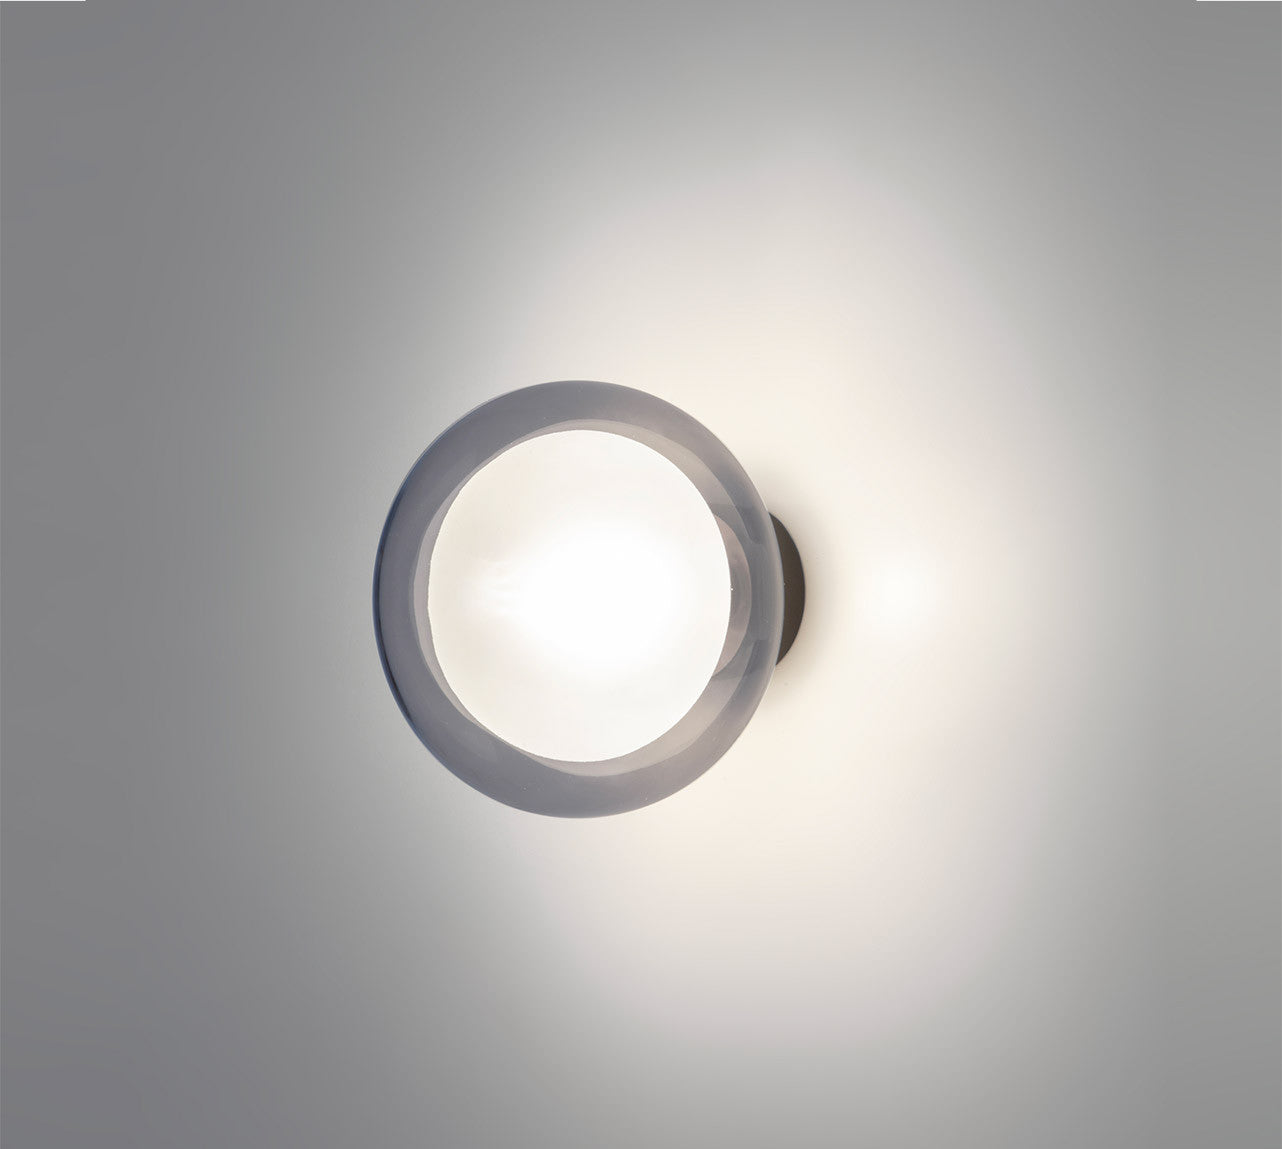 NABILA WALL/CEILING LIGHT BY TOOY from $360.00